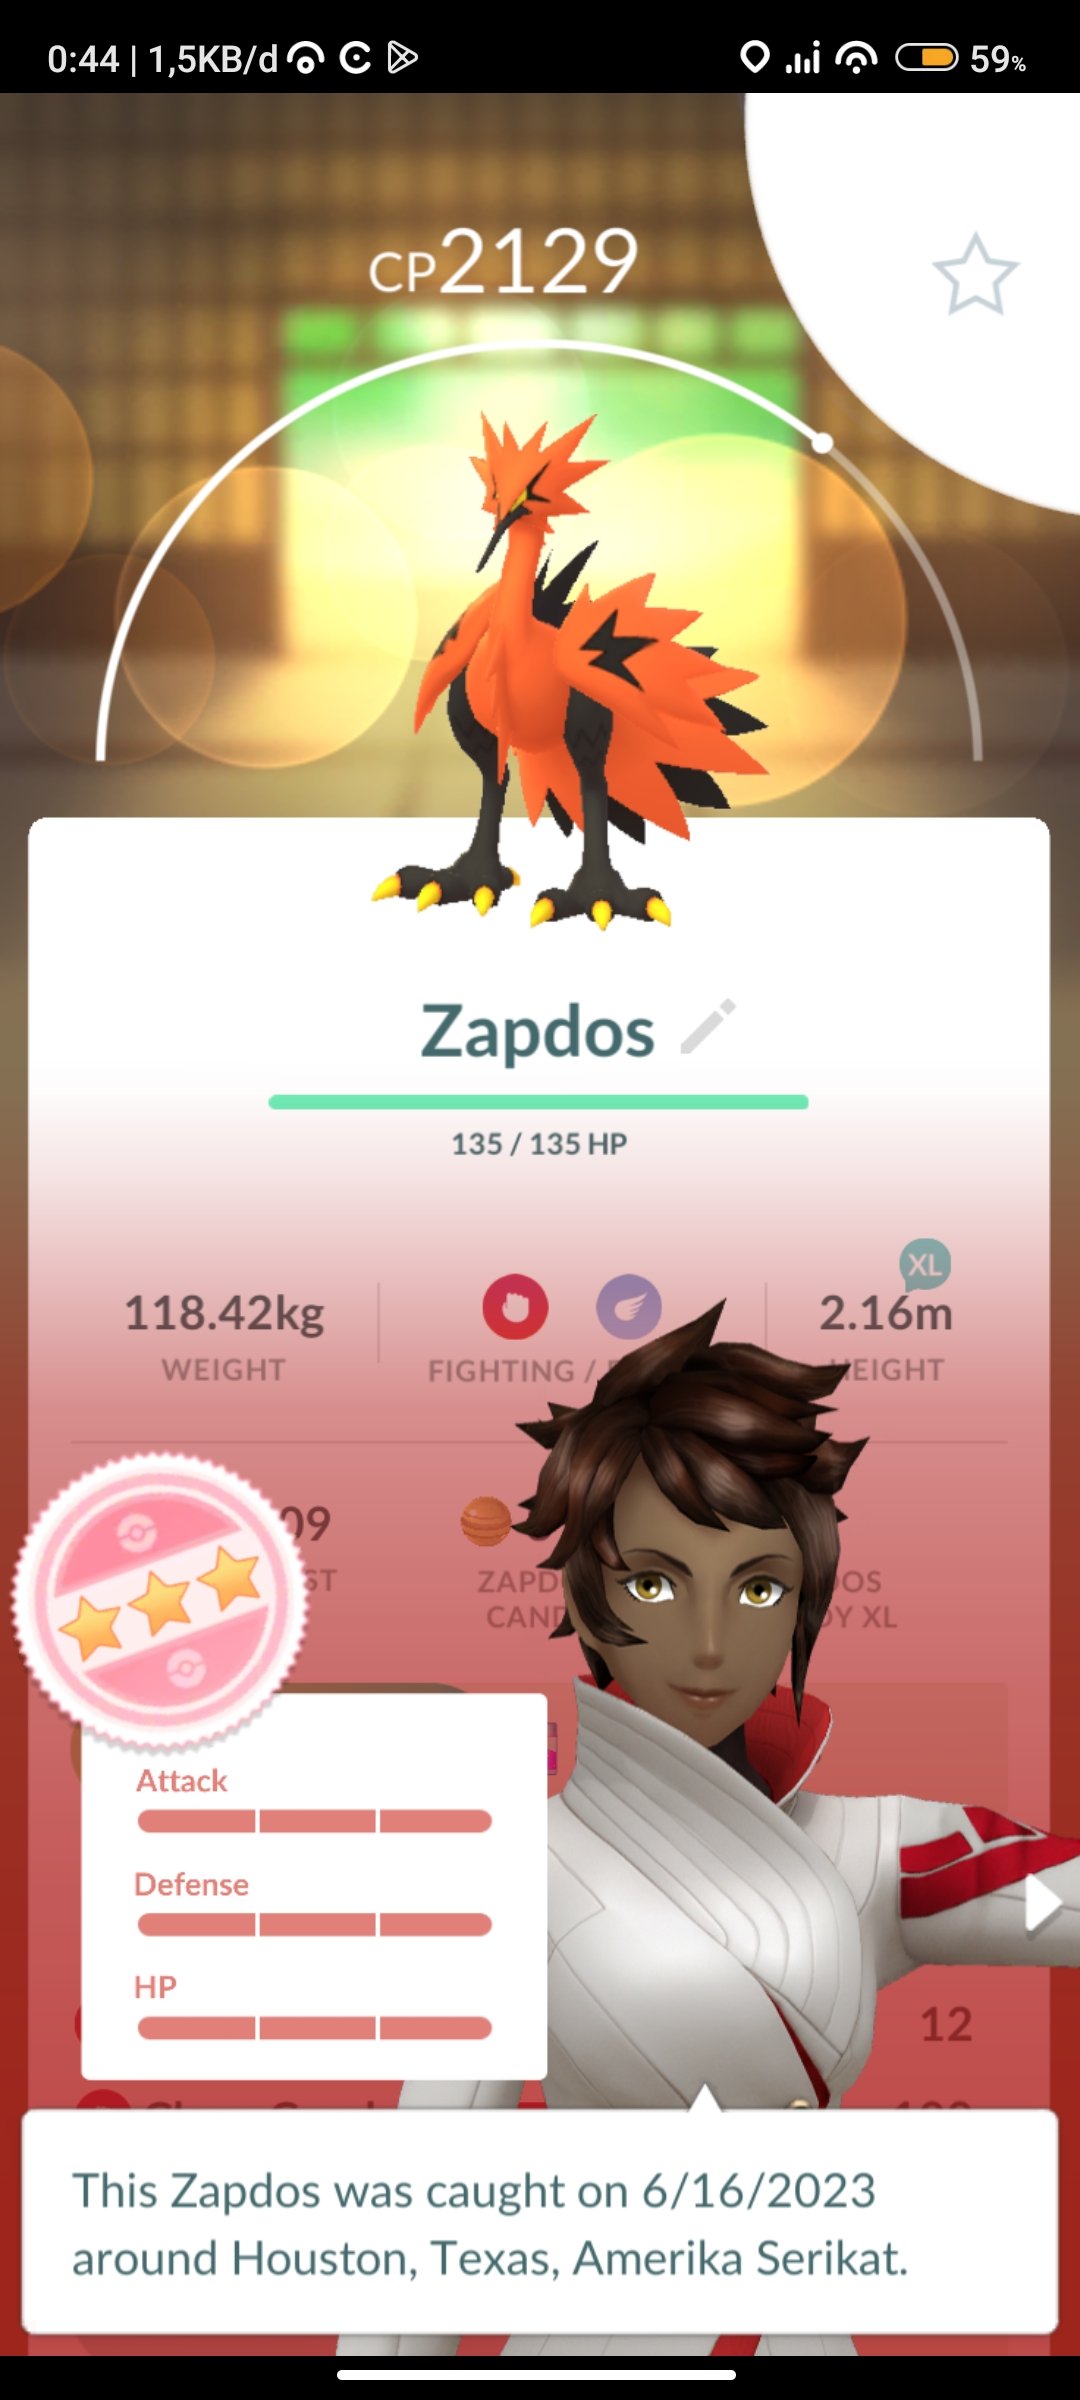 How to Get Galarian Zapdos in Pokemon GO